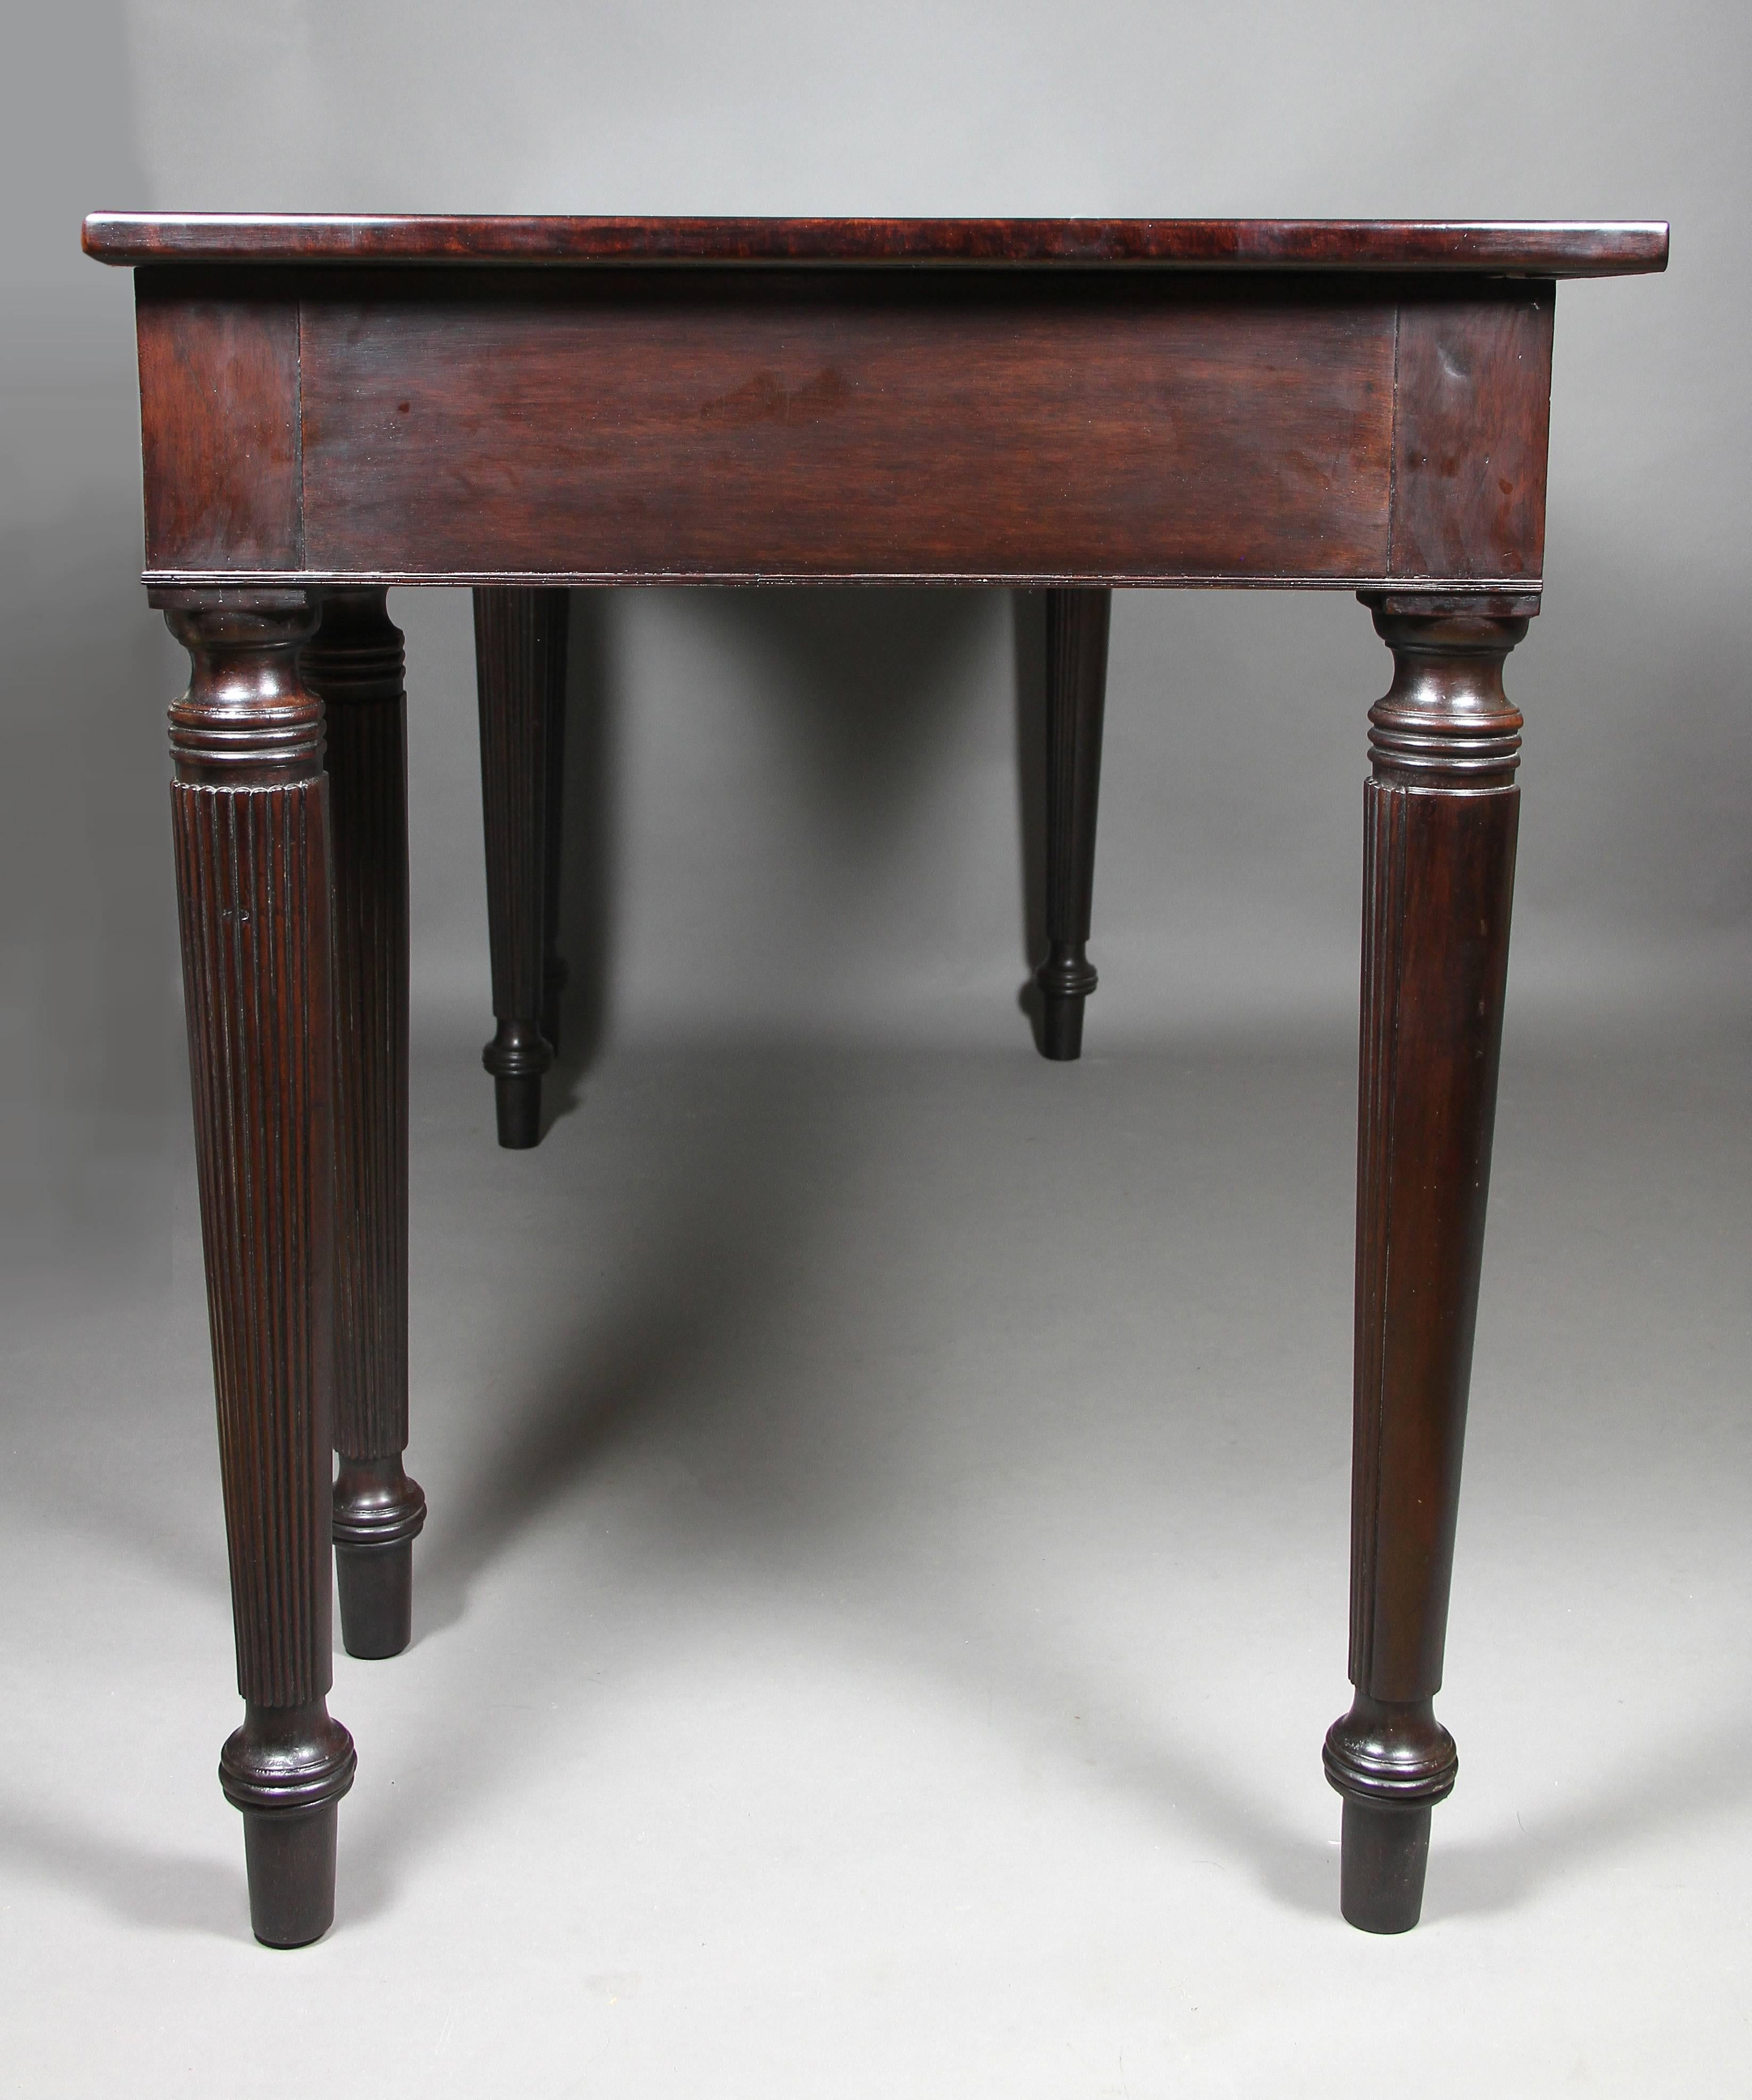 Rectangular top with concave mid section over a conforming frieze with three drawers and horizontal carved reeded decoration raised on circular tapered reeded legs and toupie feet.